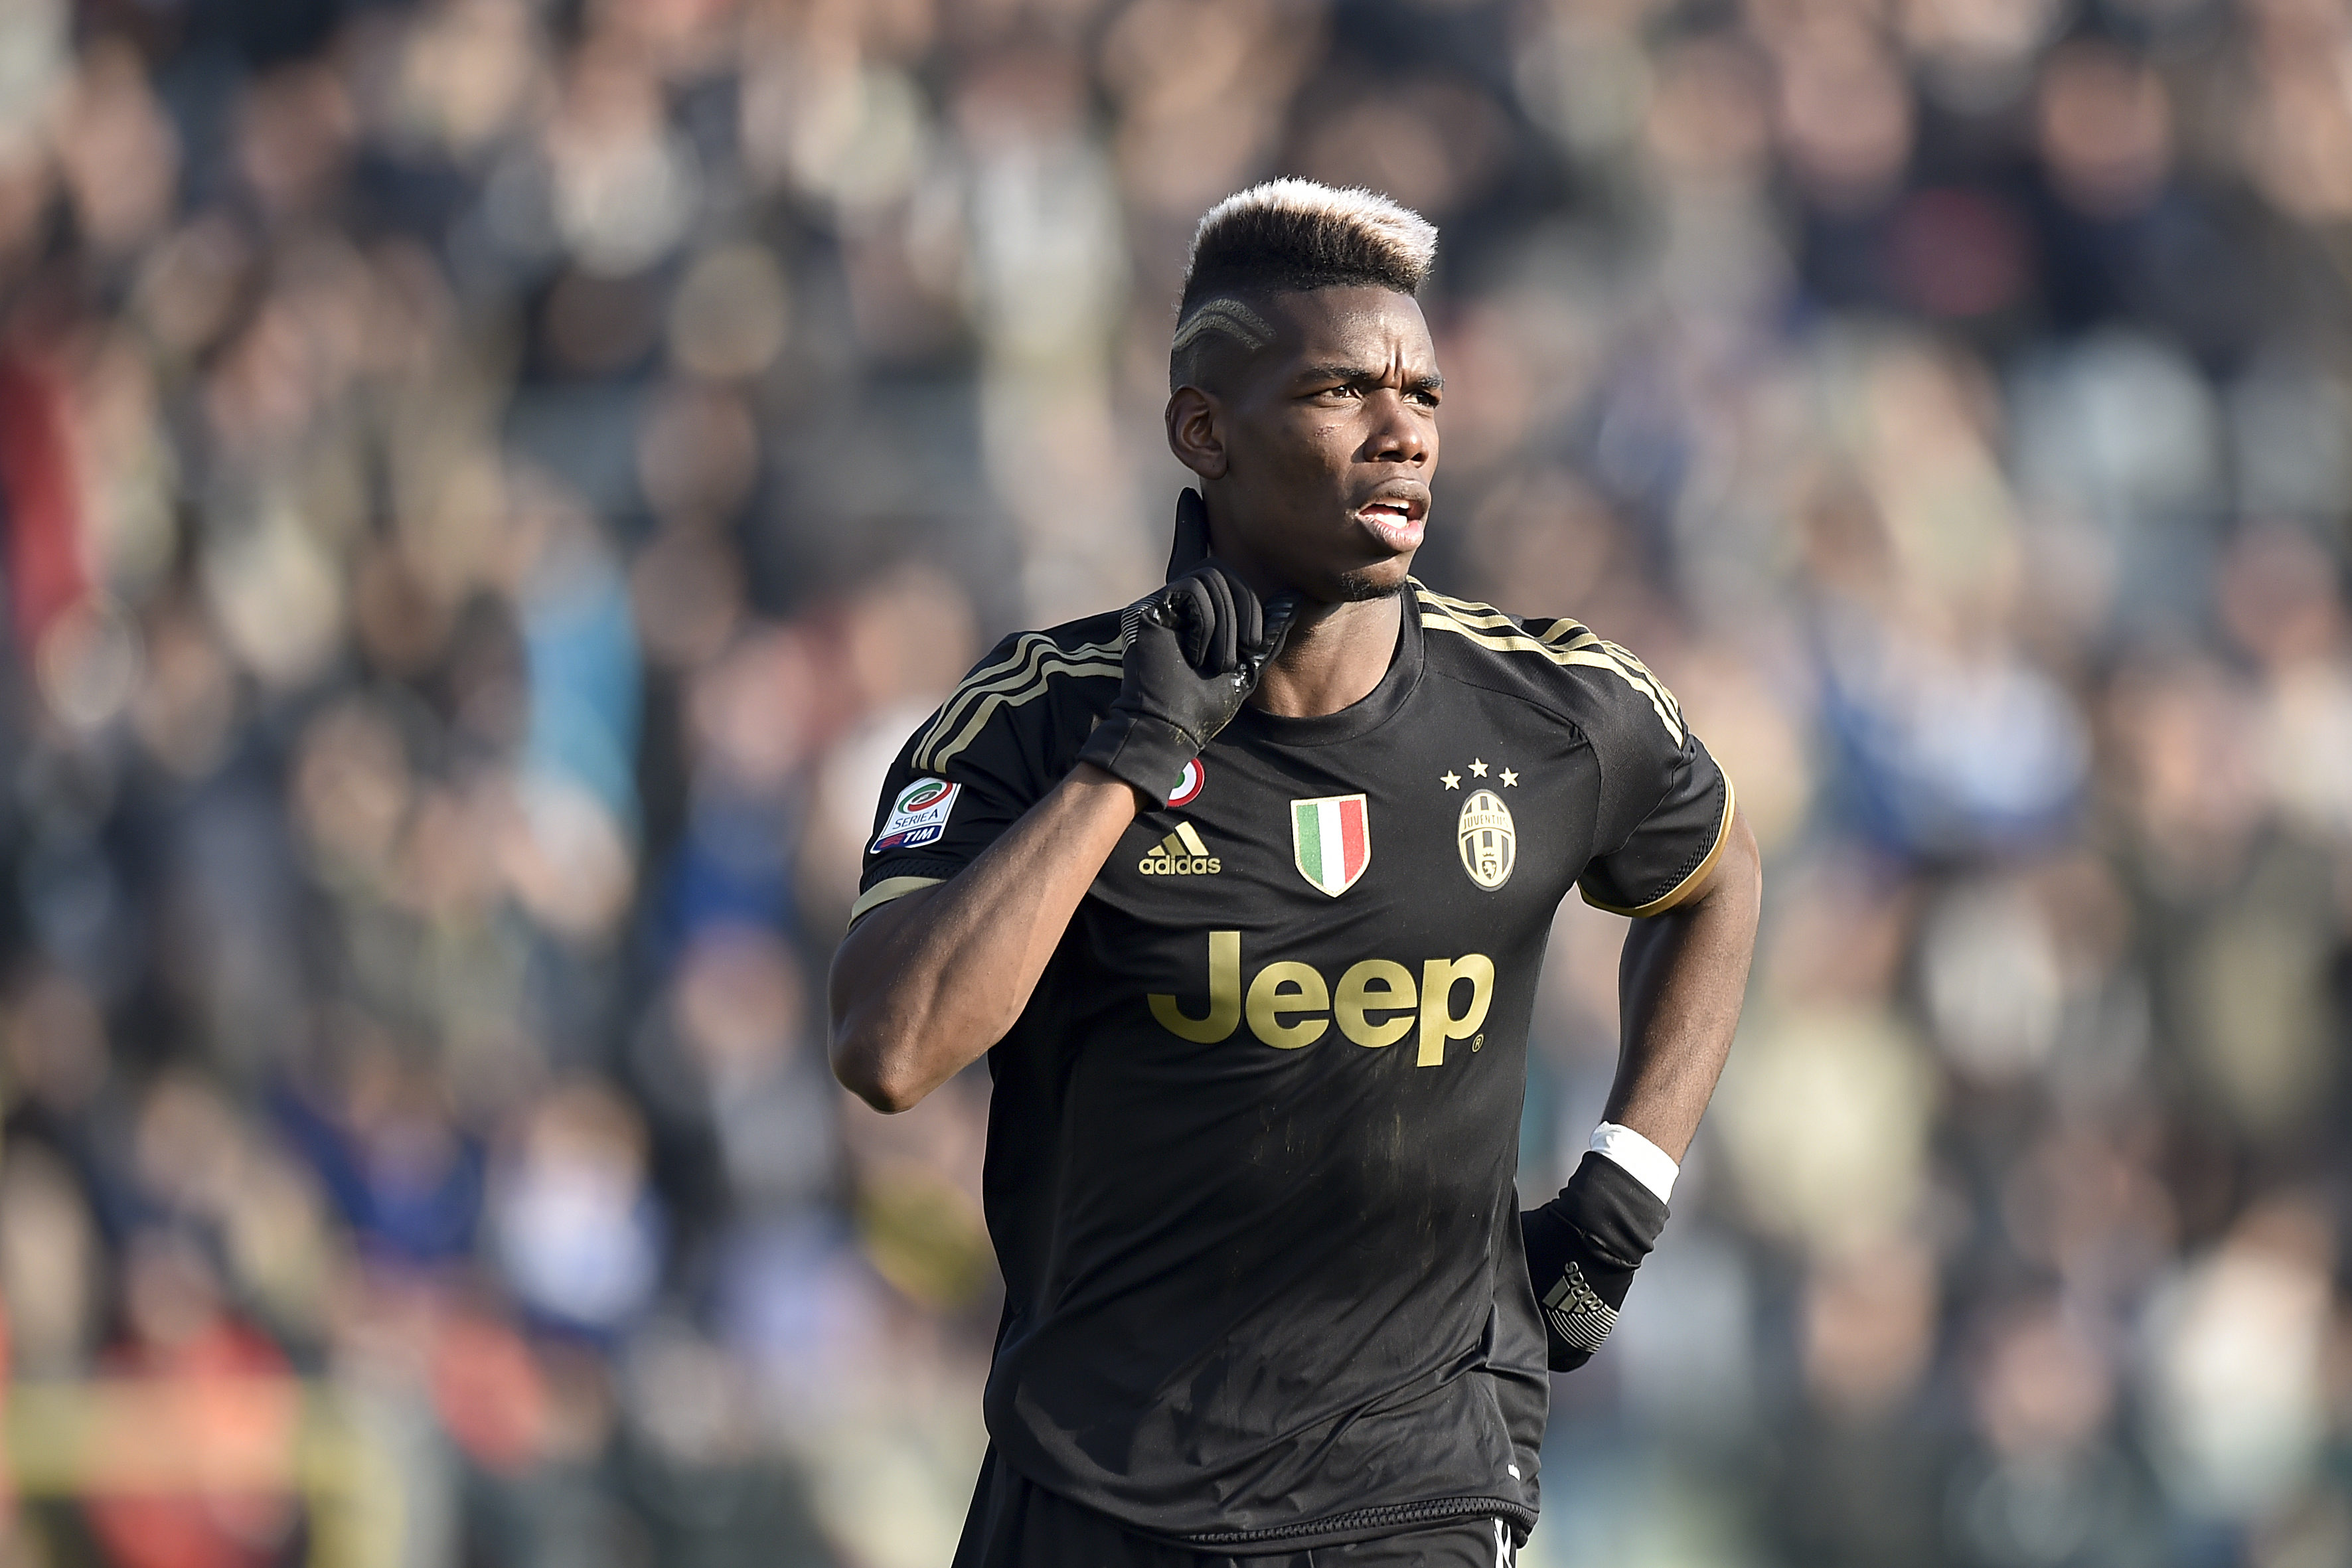 Raiola: 'Pogba is fine to stay with Juventus ' -Juvefc.com3543 x 2362